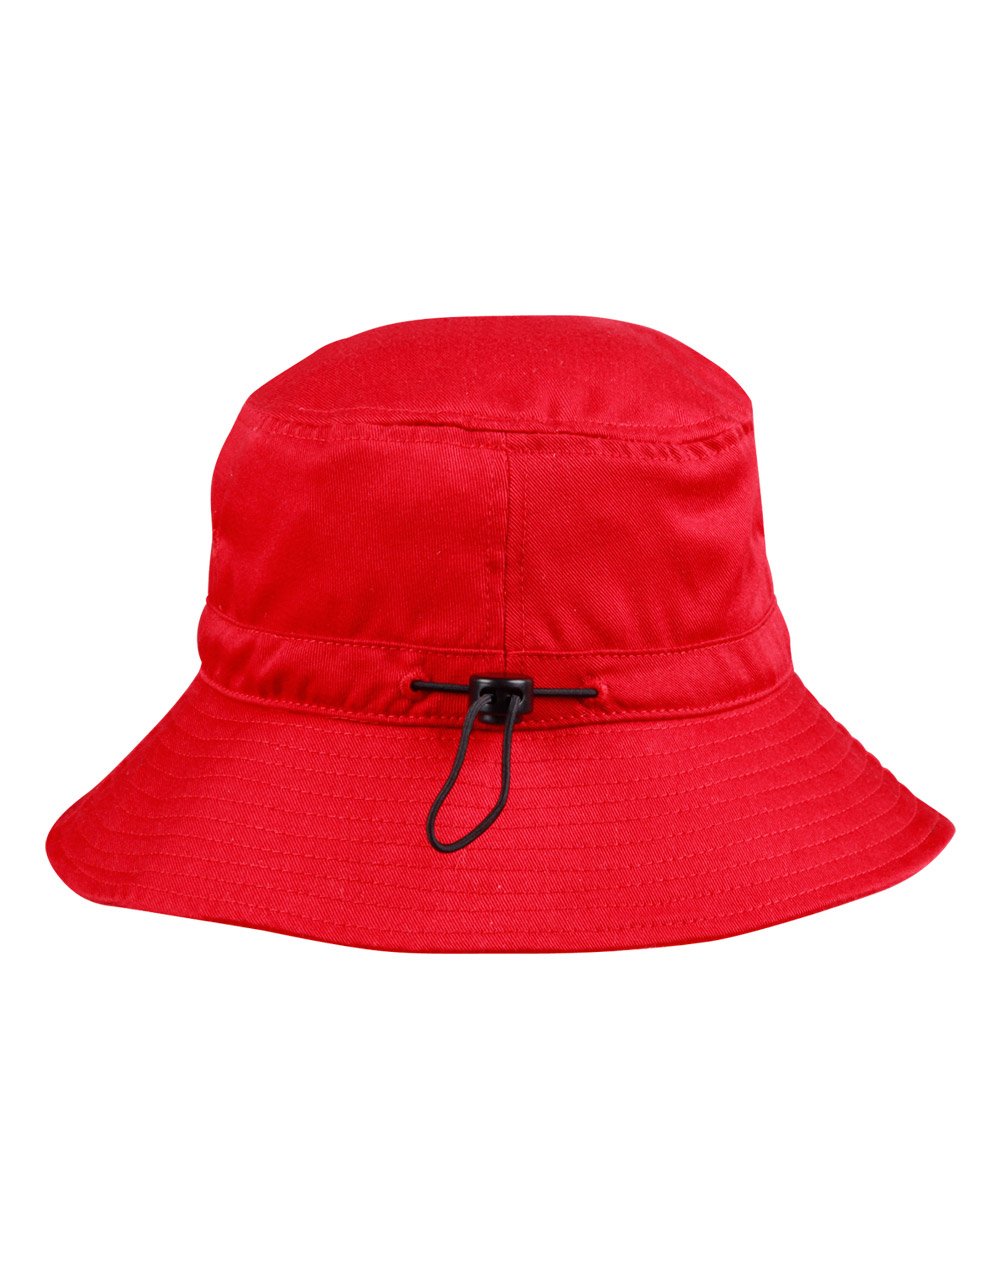 H1034 Bucket Hat With Toggle - Star Uniforms Australia